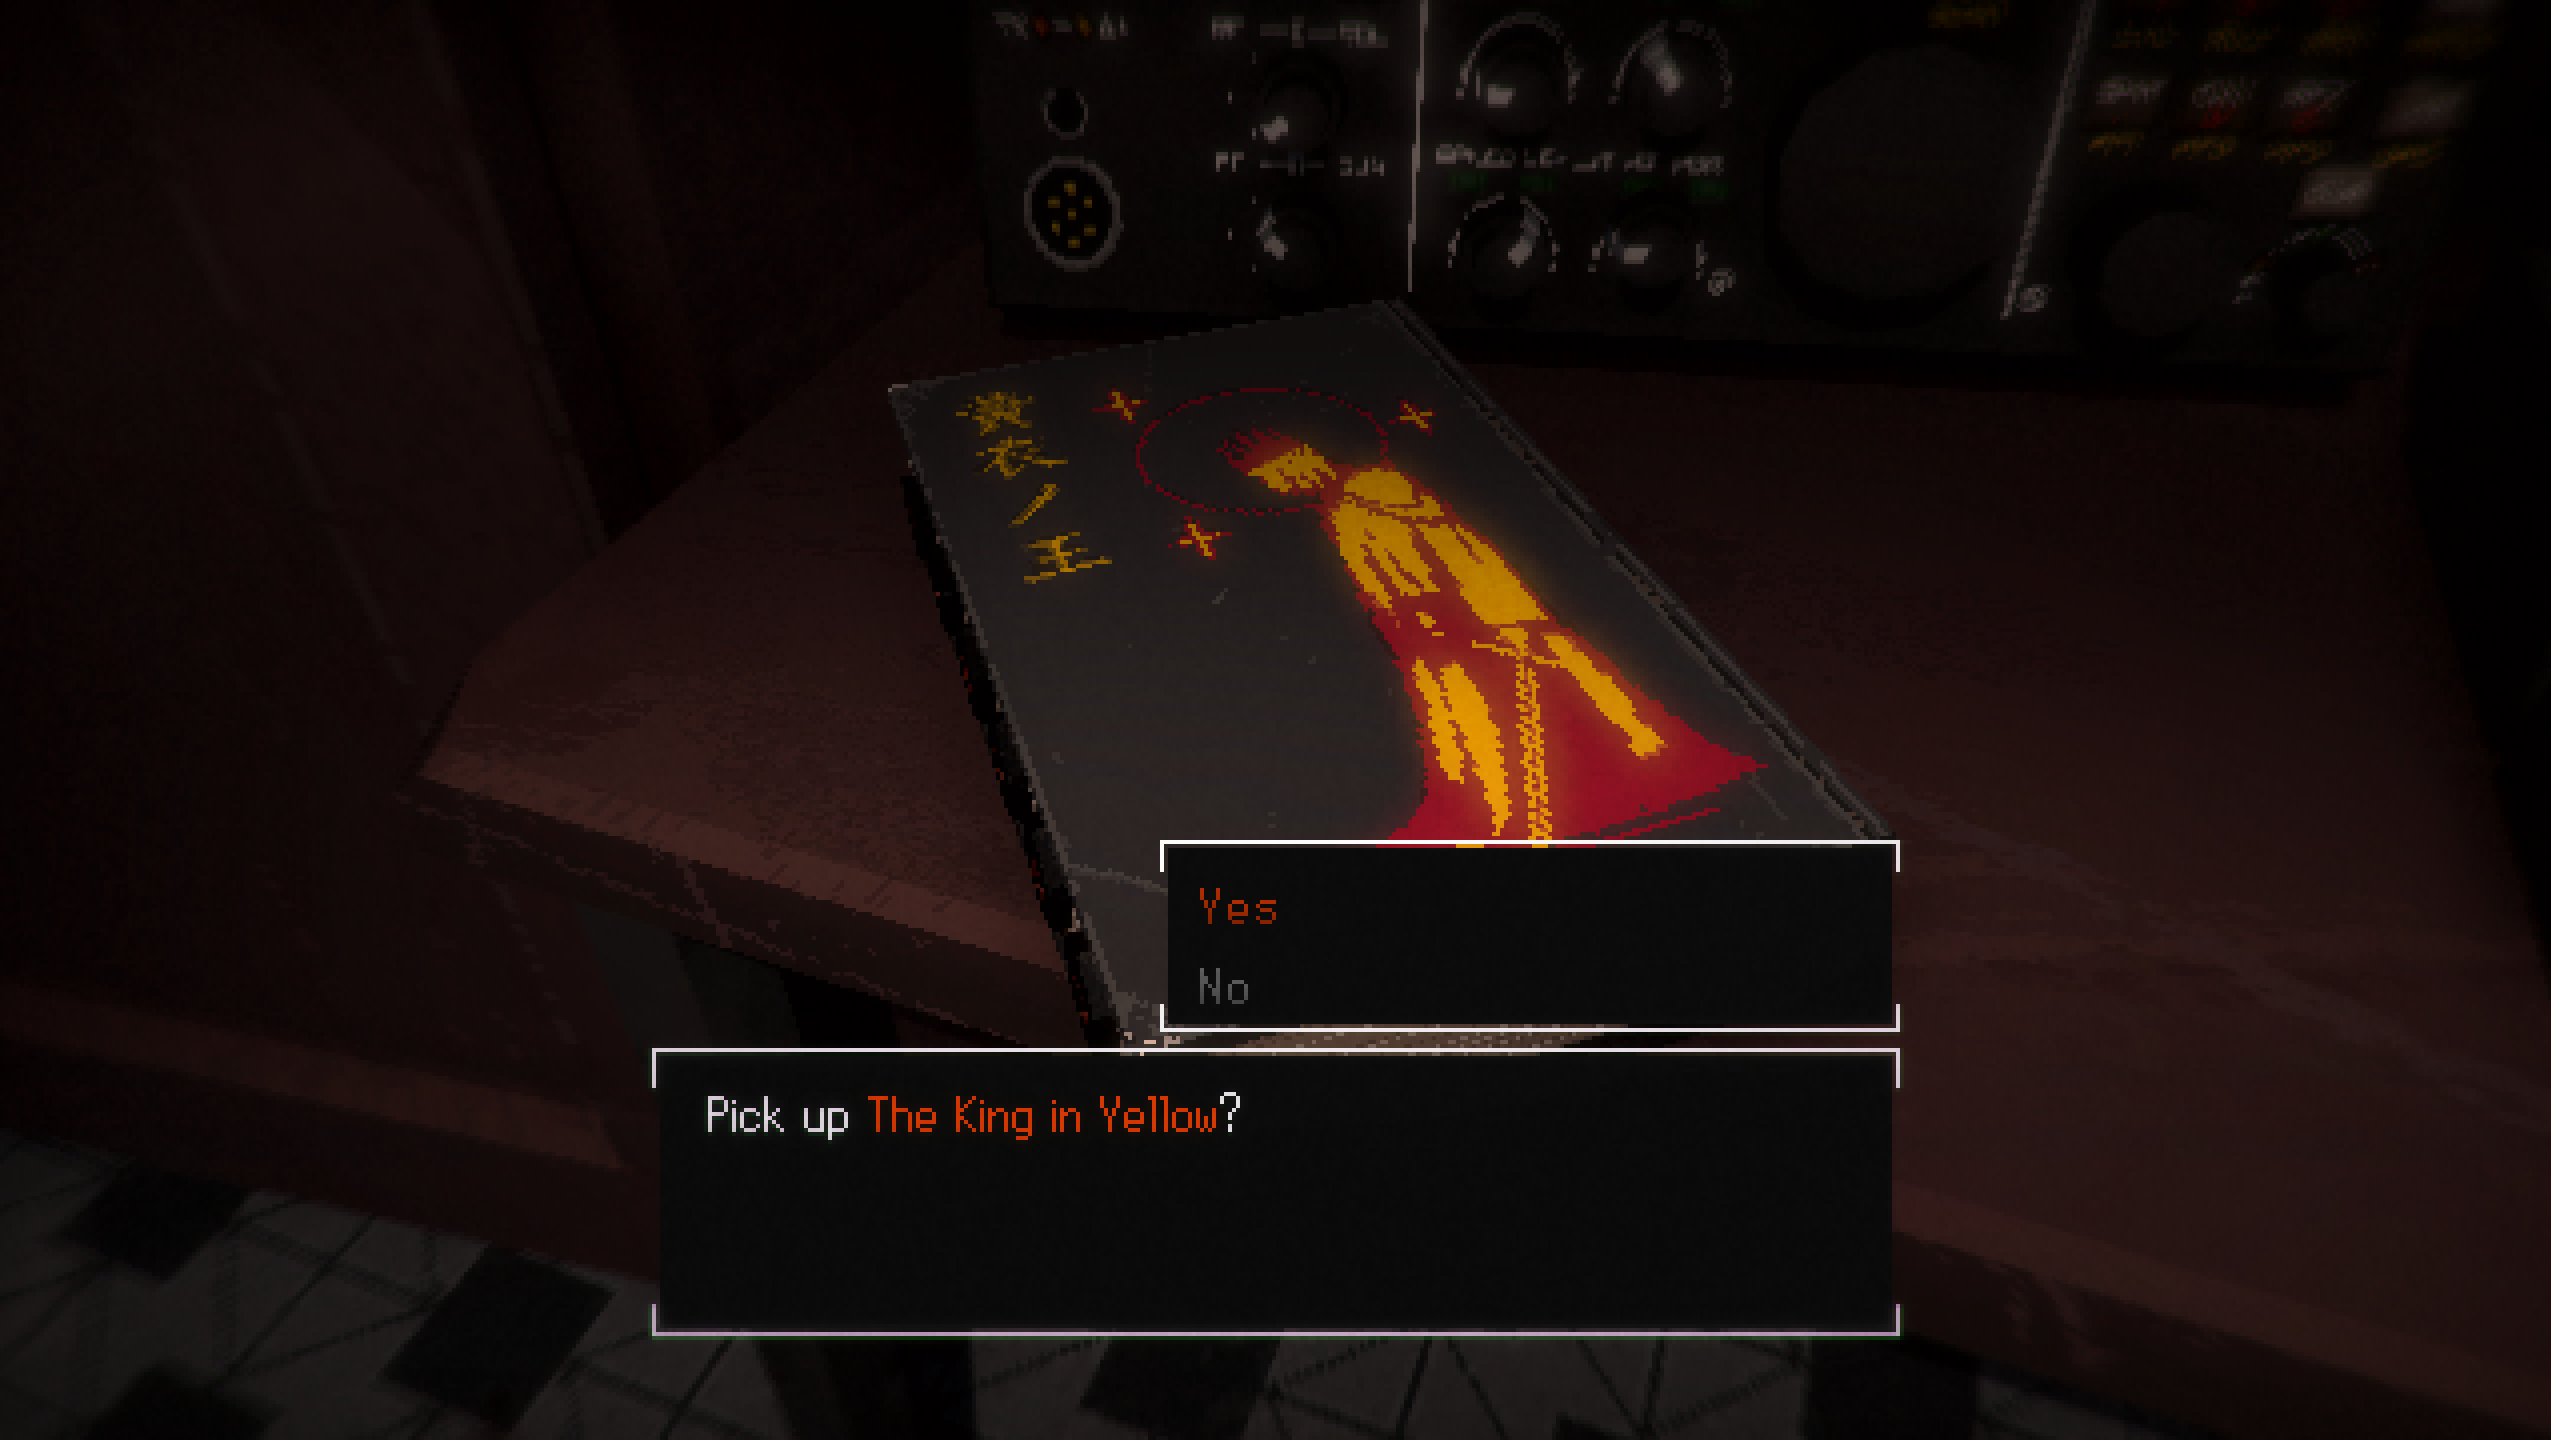 A text prompt of the game asking the player if they want to pick up a copy of H.P. Lovecraft's The King in Yellow